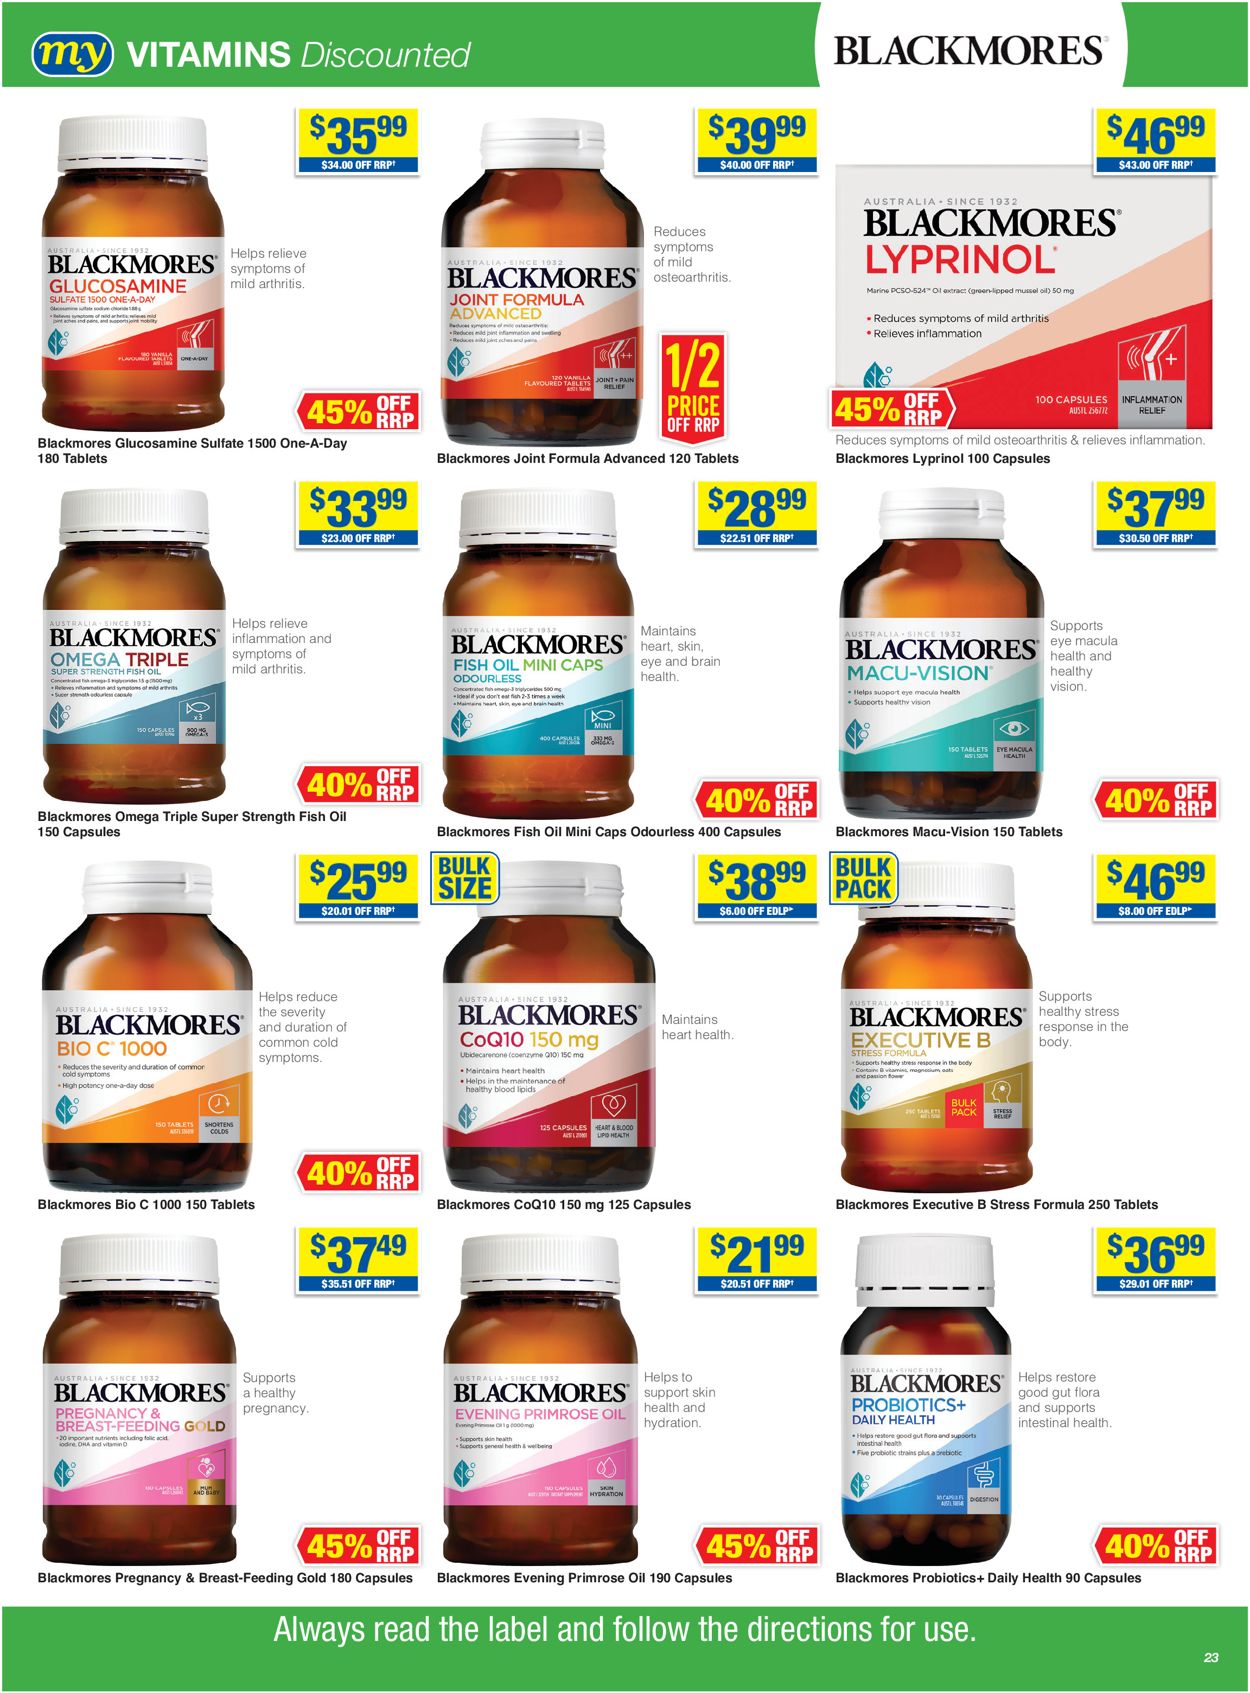 My Chemist Catalogue from 26/05/2022